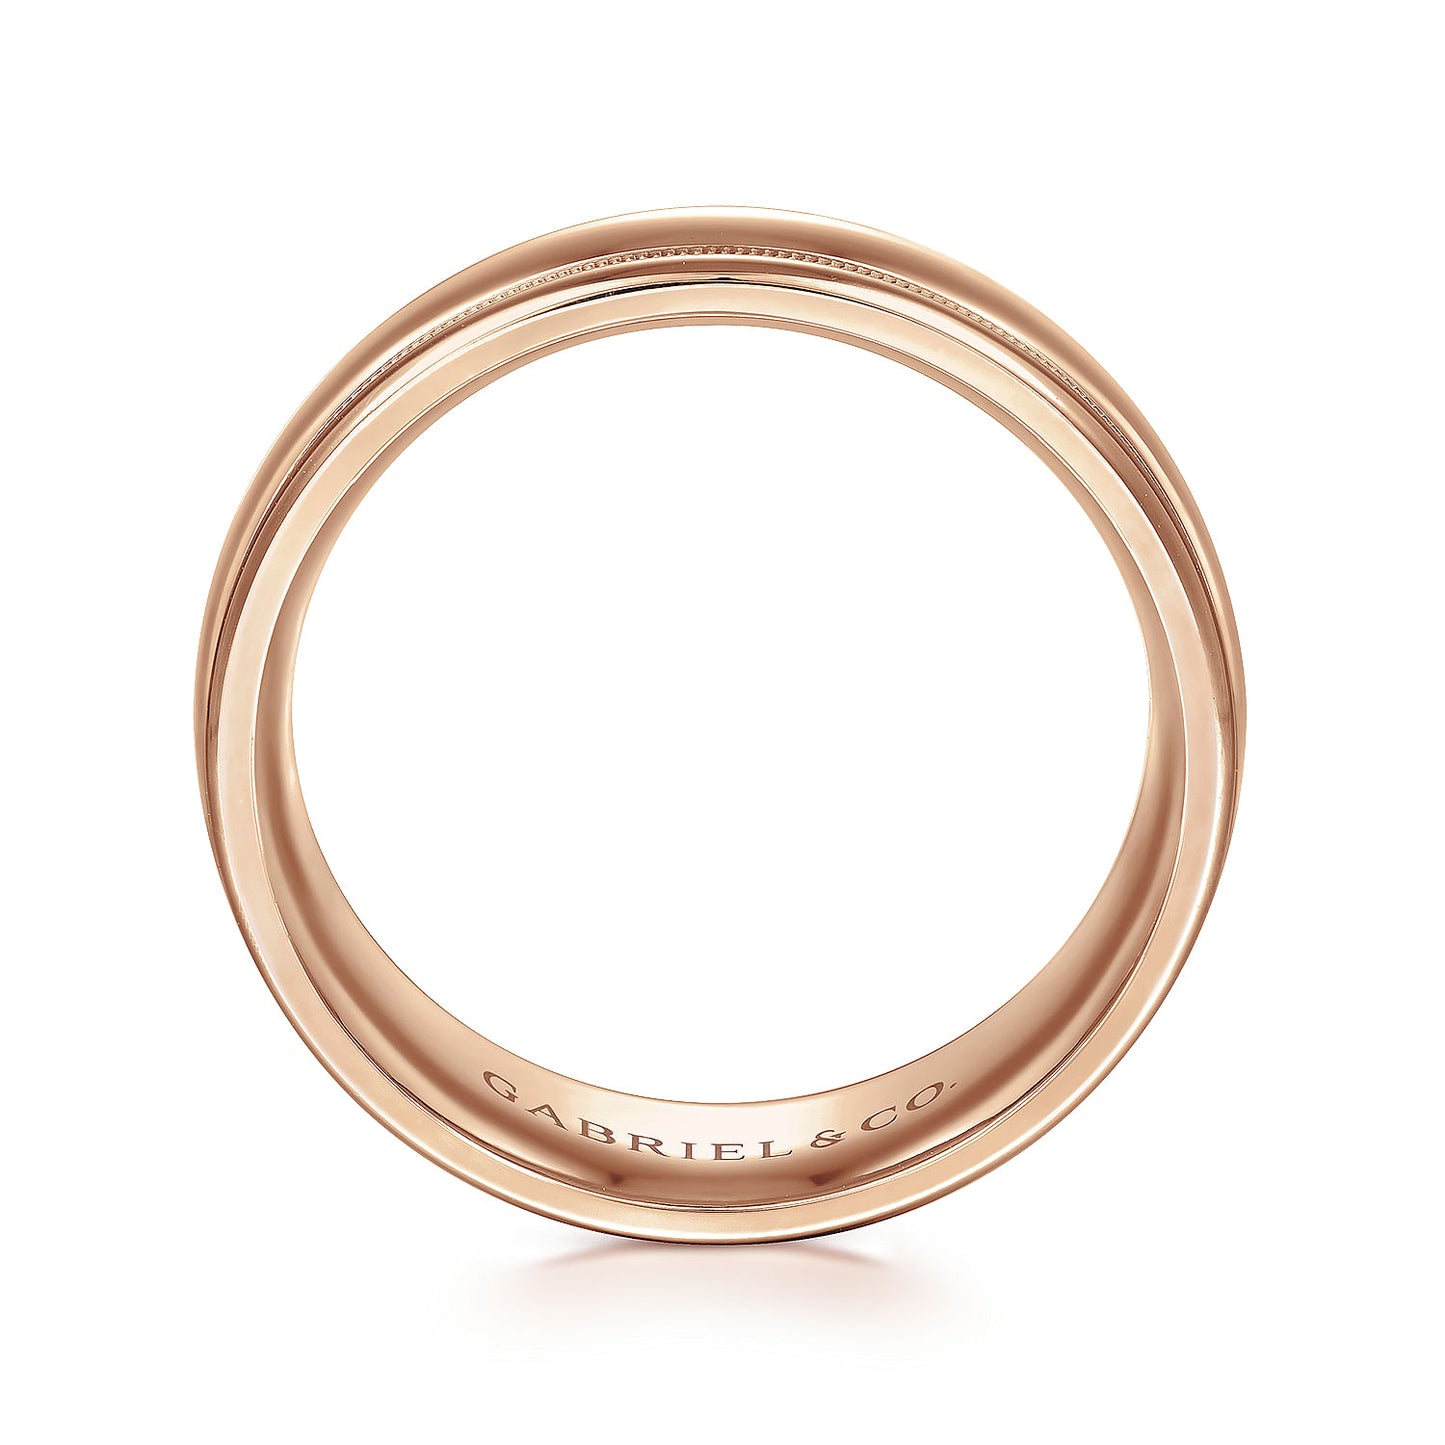 Gabriel & Co Rose Gold Wedding Band With A Raised Center And Milgrain Accents - Gold Wedding Bands - Men's